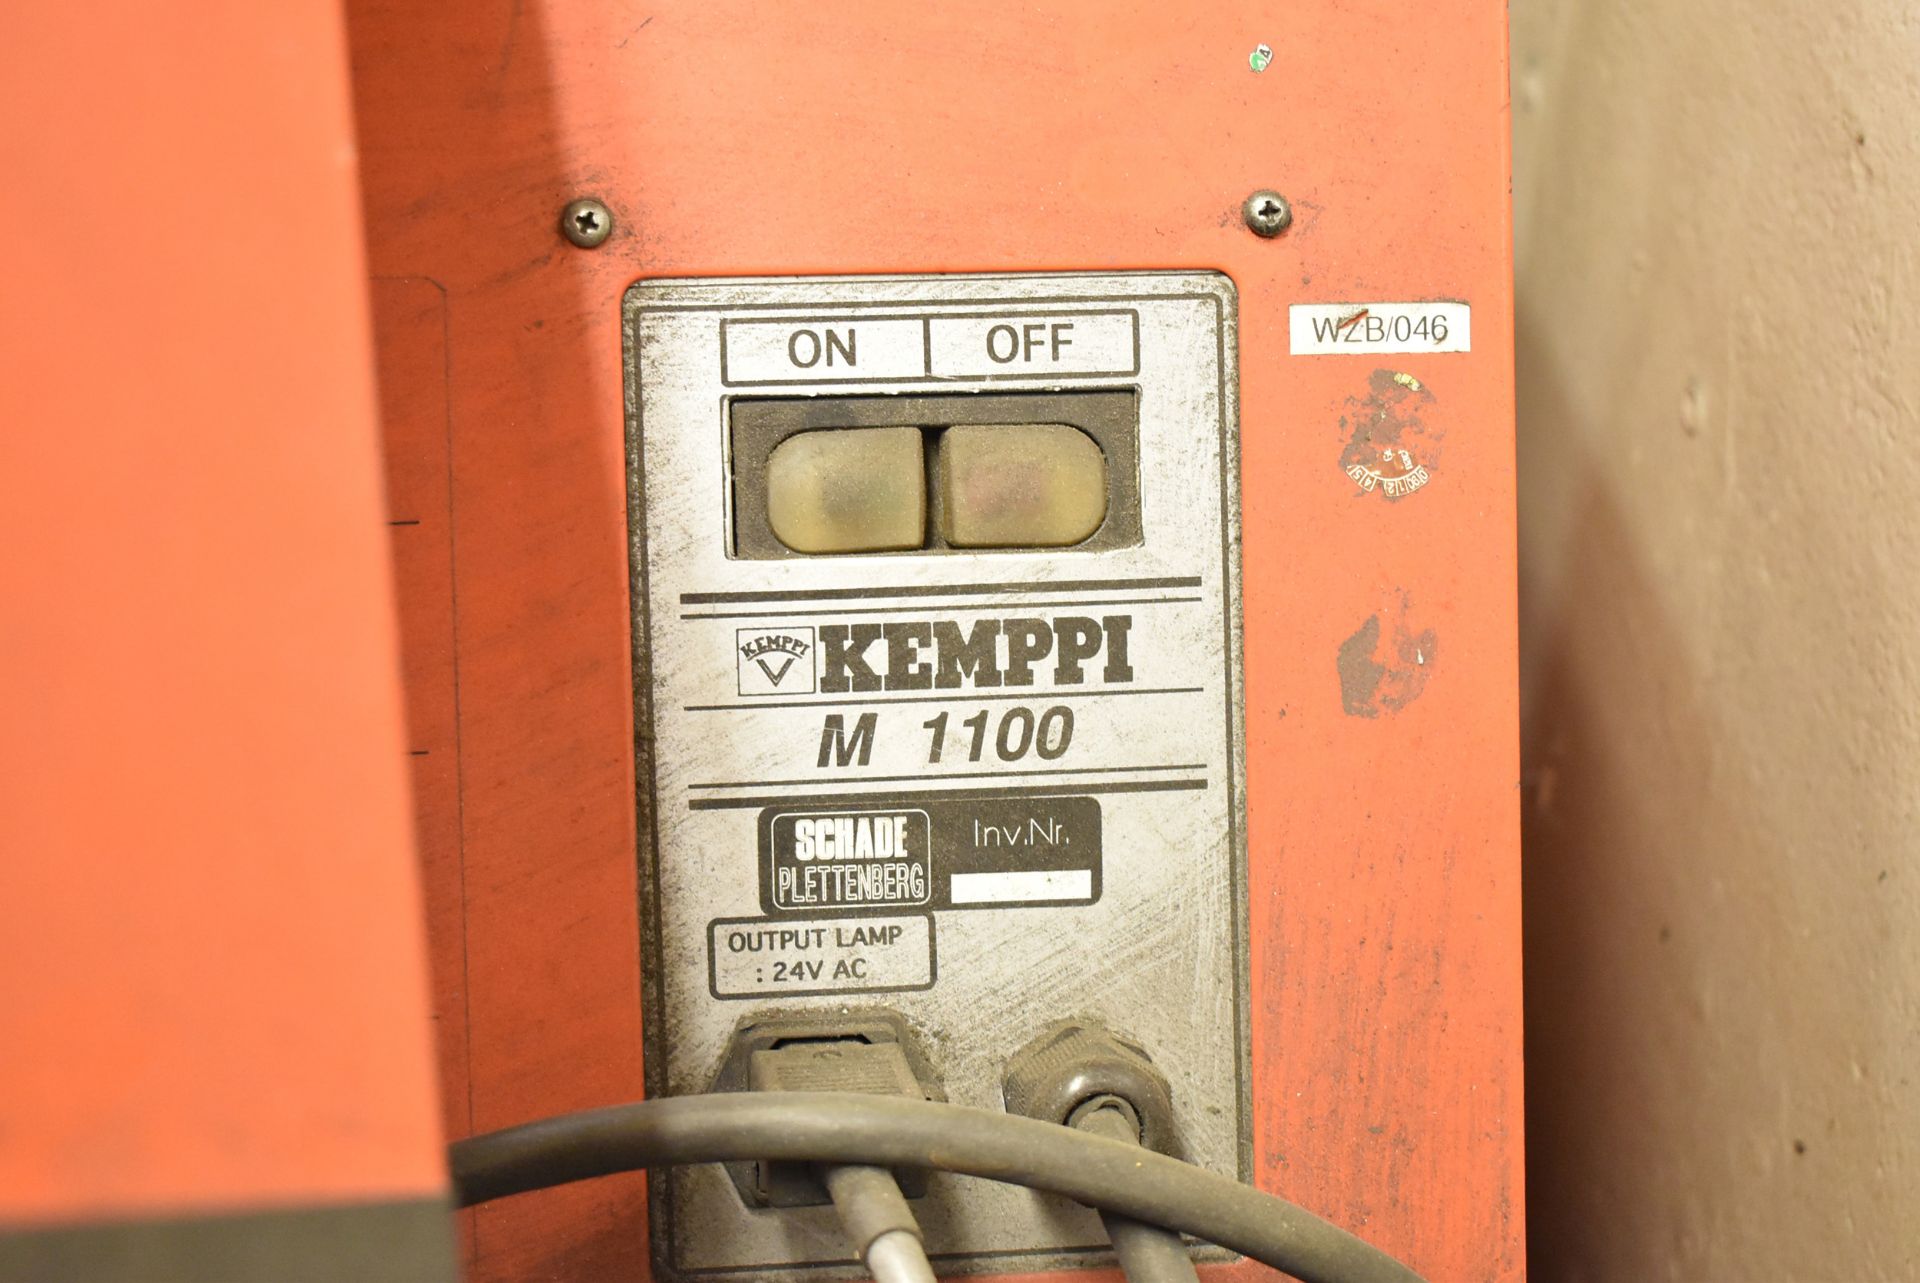 KEMPPI M1100 PORTABLE WELDING FUME EXTRACTOR, S/N N/A (SEL) [Removal Fee = € 27.50 + applicable - Image 2 of 3